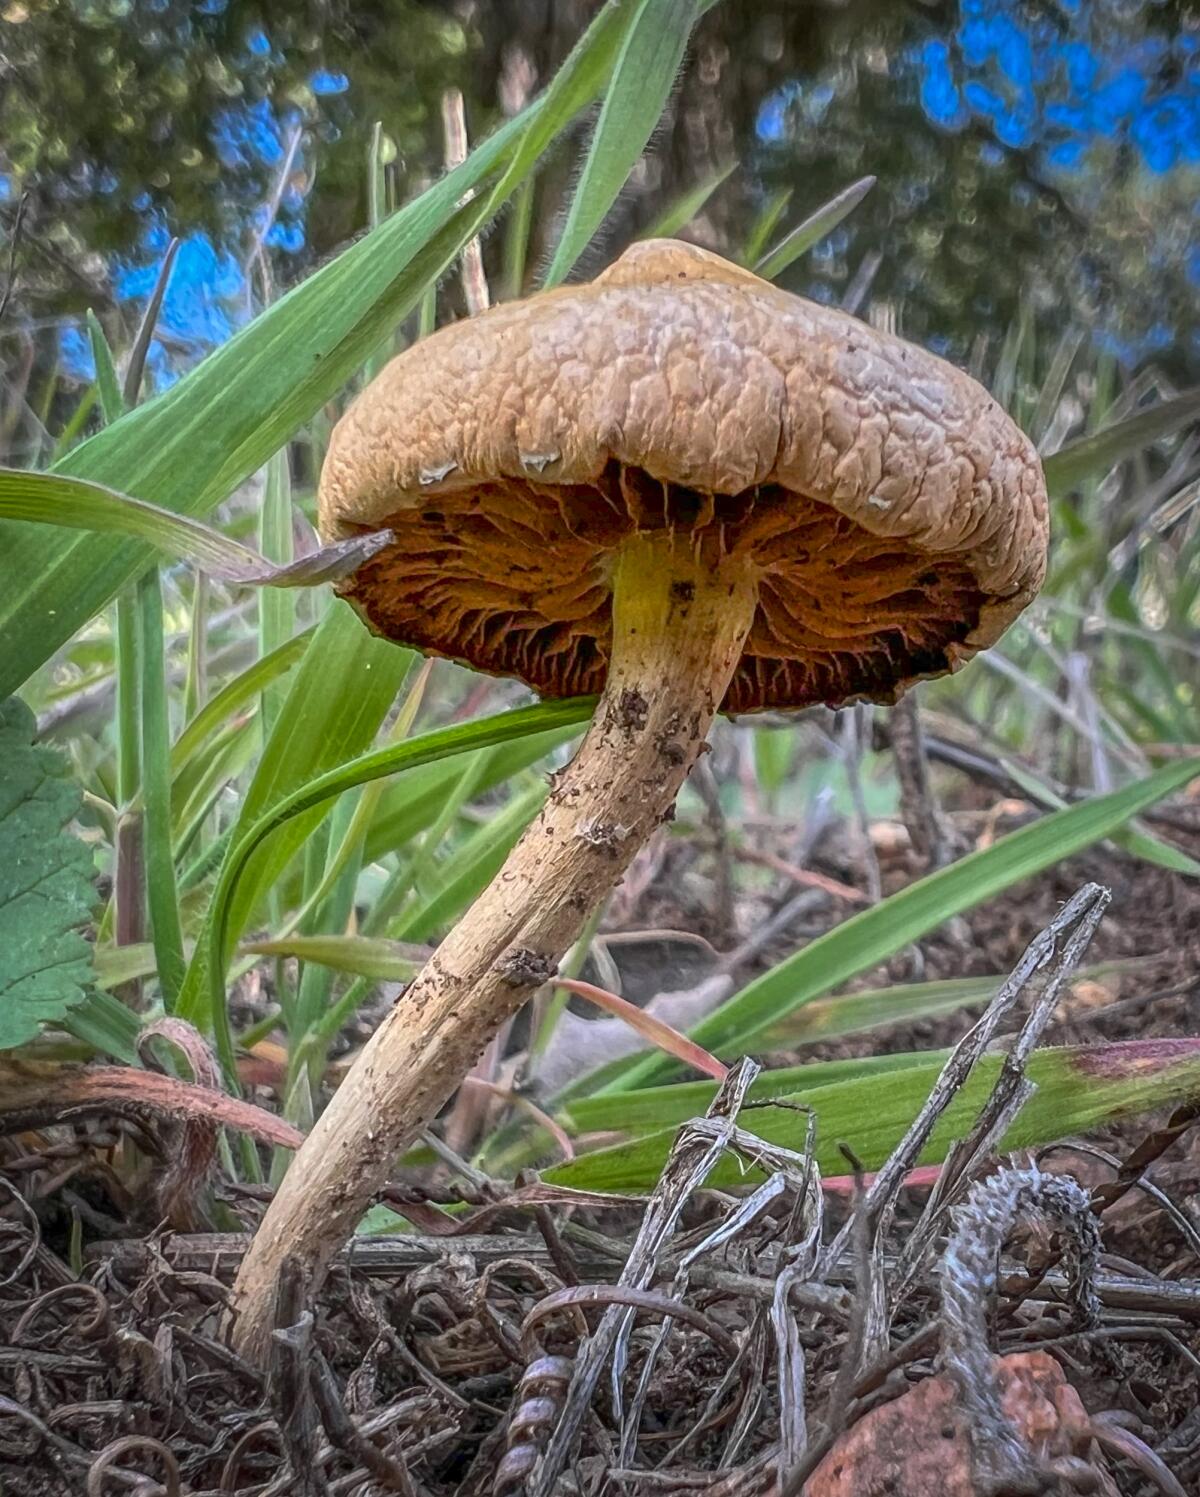 One of the delicate and beautiful mushrooms found in San Diego County.